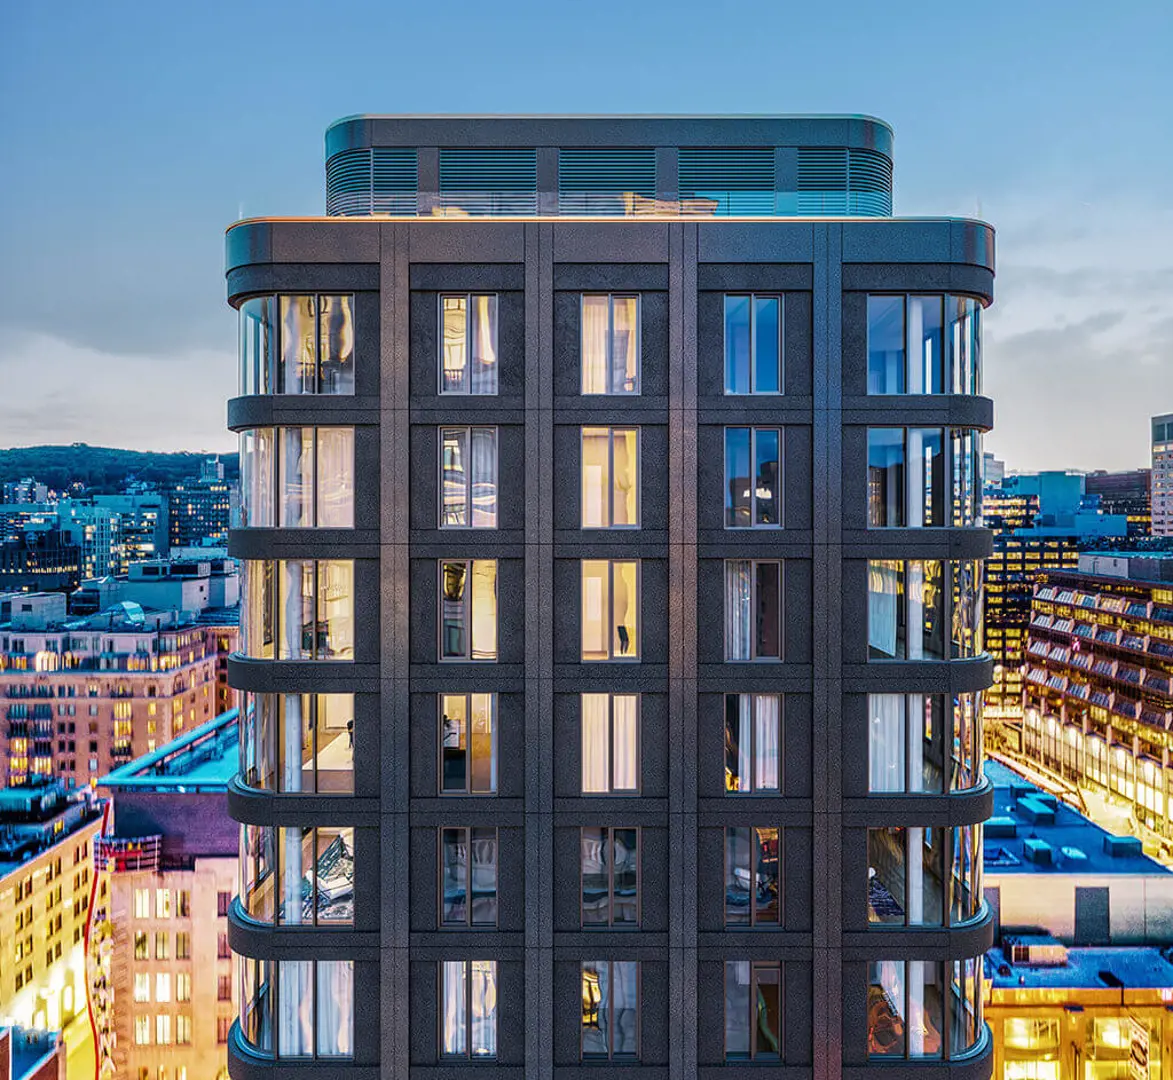 Mansfield Condo located at 1228 Rue Mansfield,  Montréal,   QC image